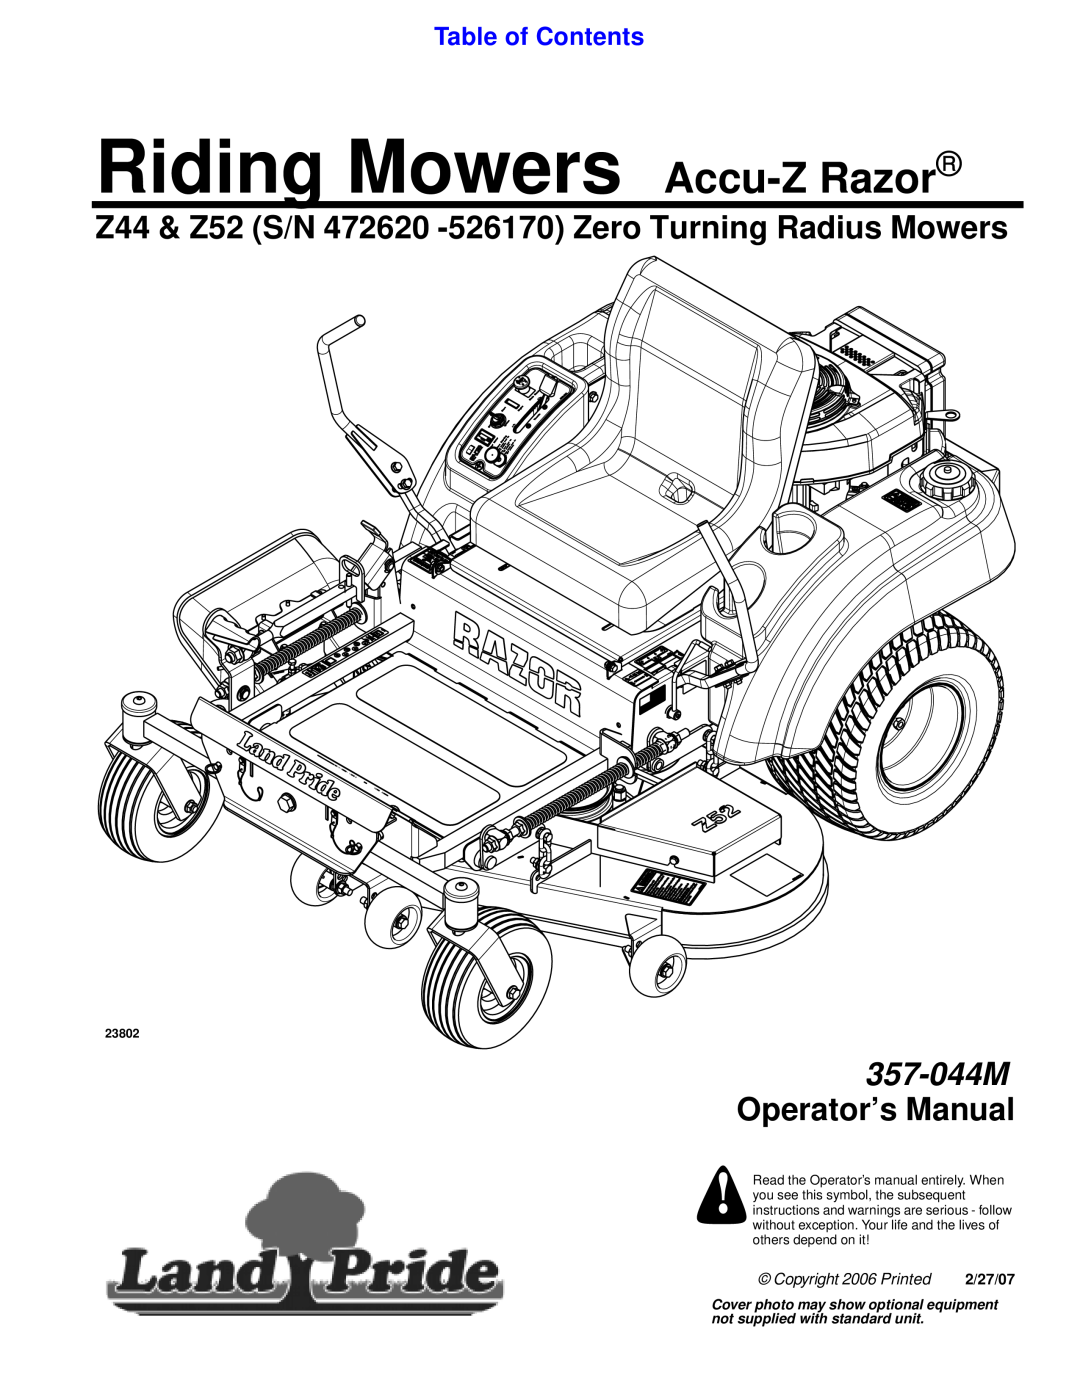 Land Pride 357-044M manual Z44 & Z52 S/N 472620 -526170 Zero Turning Radius Mowers, Table of Contents, others depend on it 